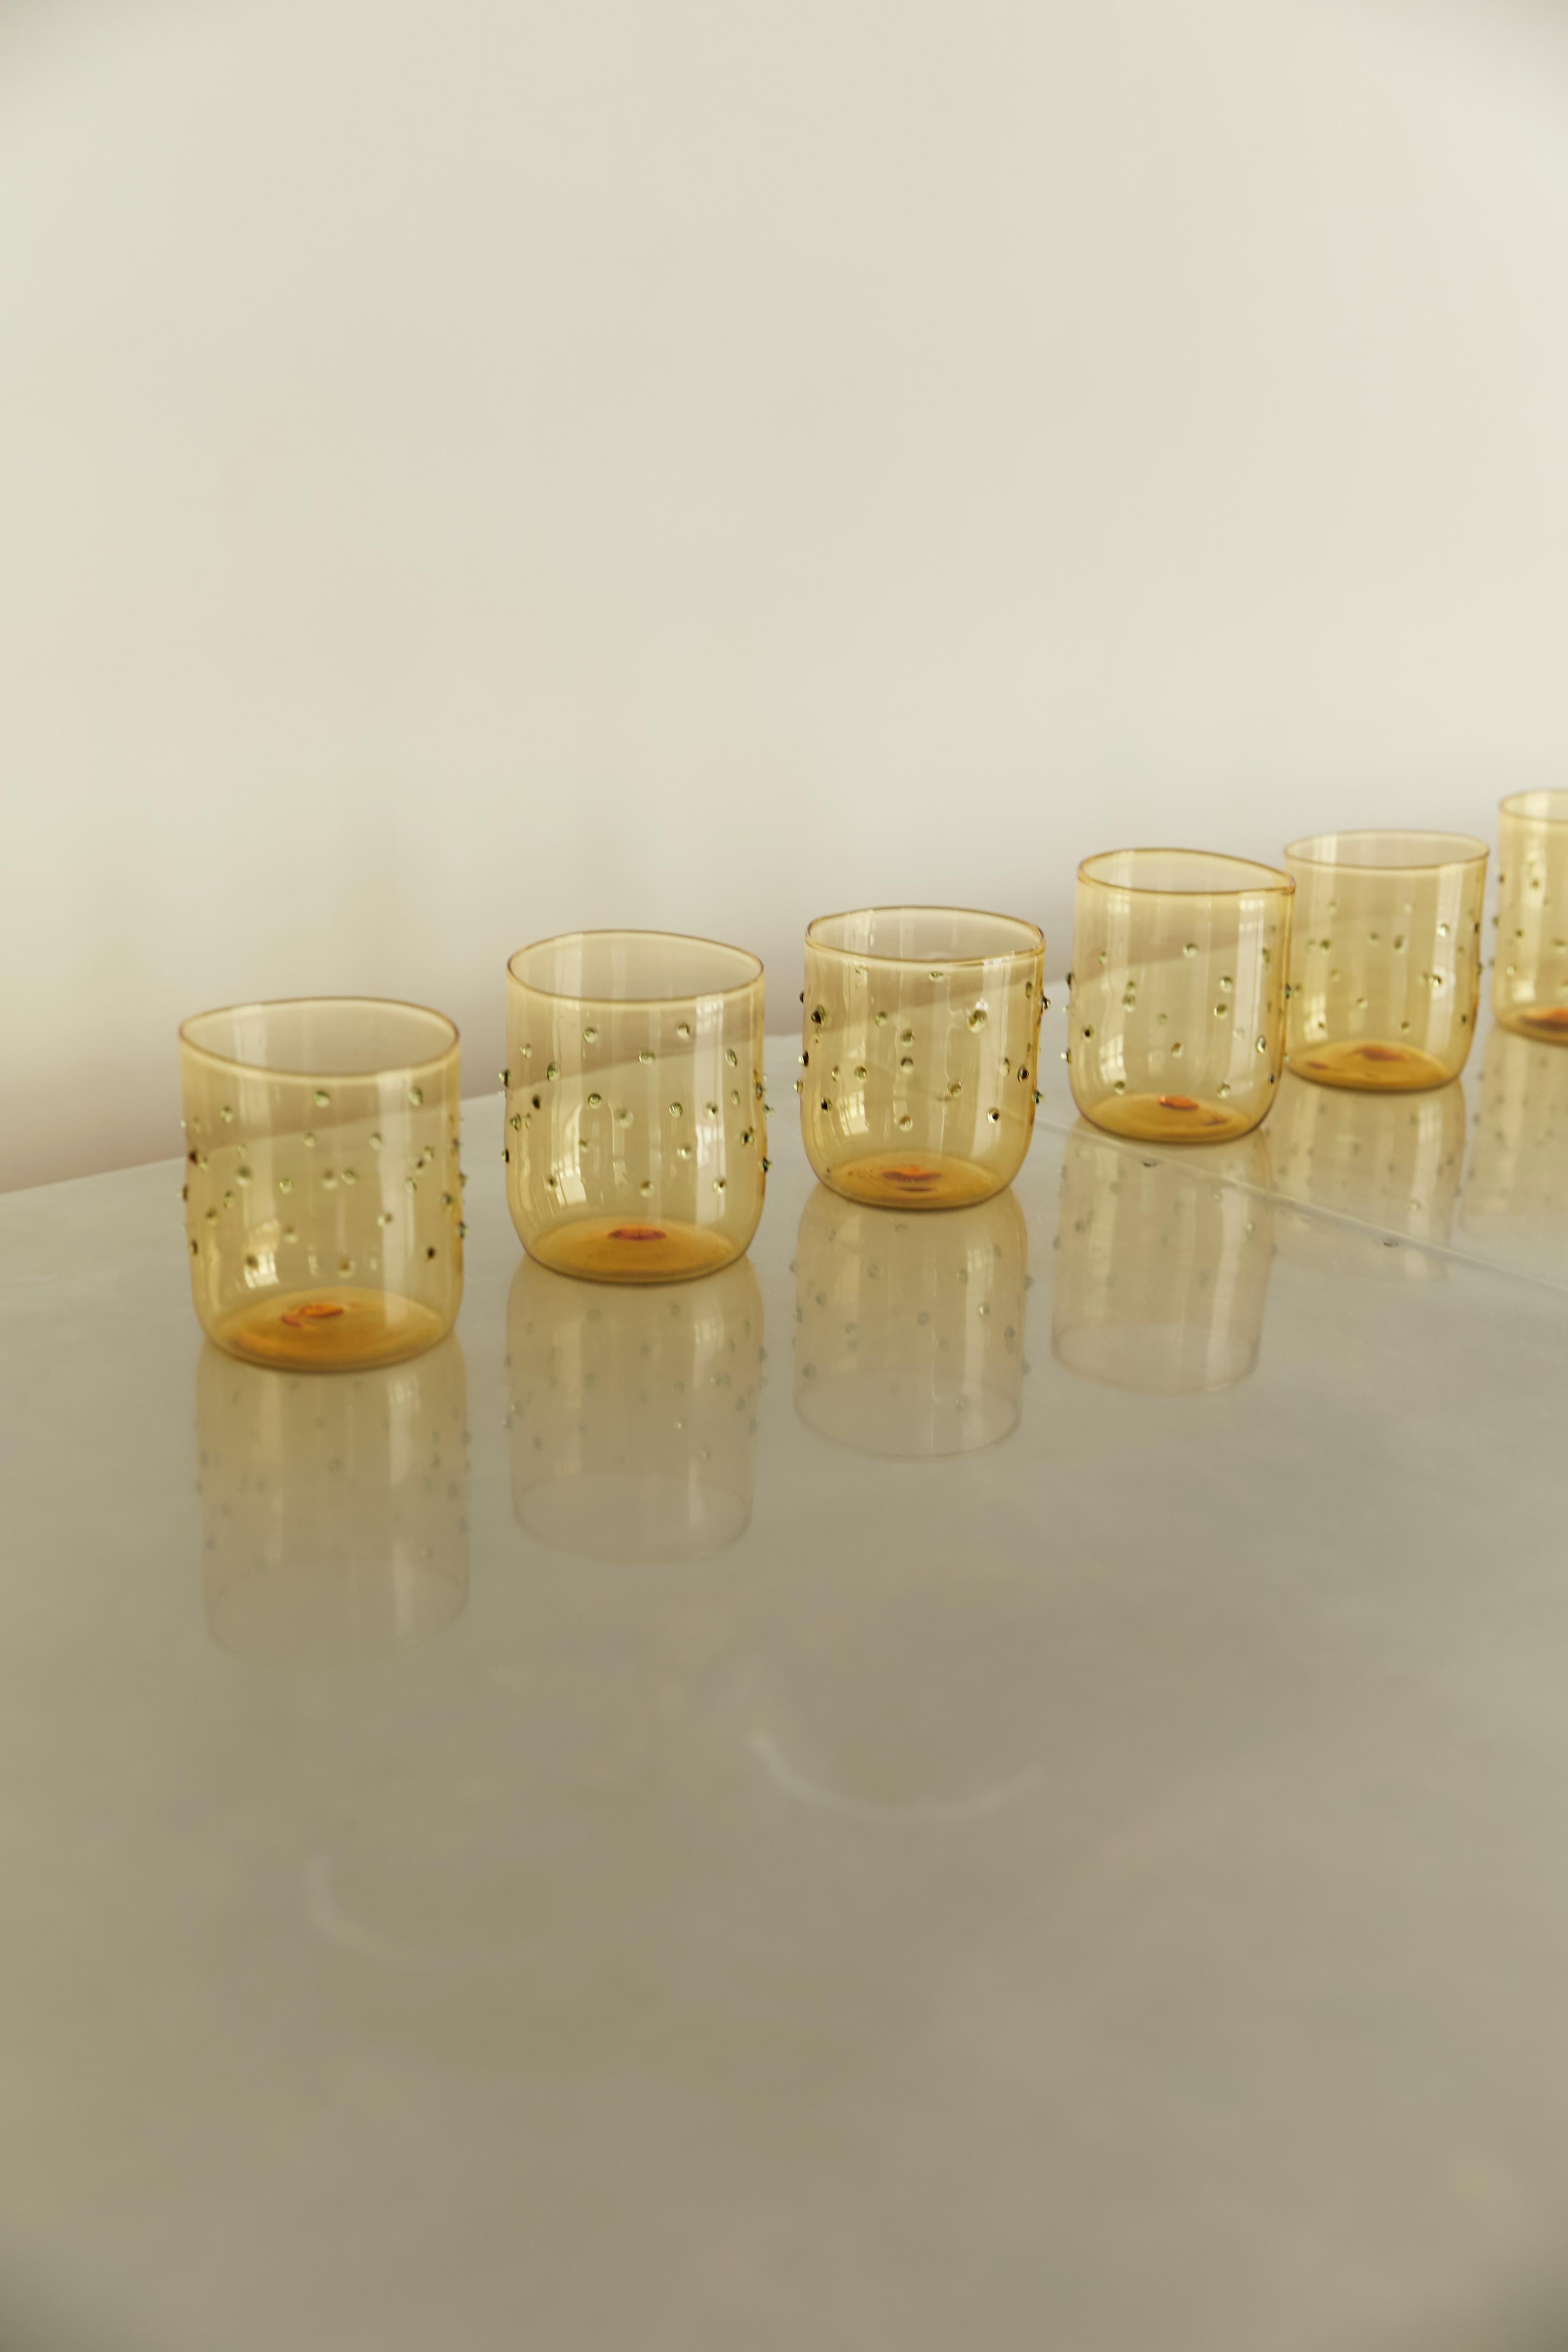 Handmade artisan glasses made in Spain with the traditional technique of blown glass but with contemporary modern design. Using tinted yellow glass with green detailed dots, this Limoncello glasses are created. The handmade craft makes each piece